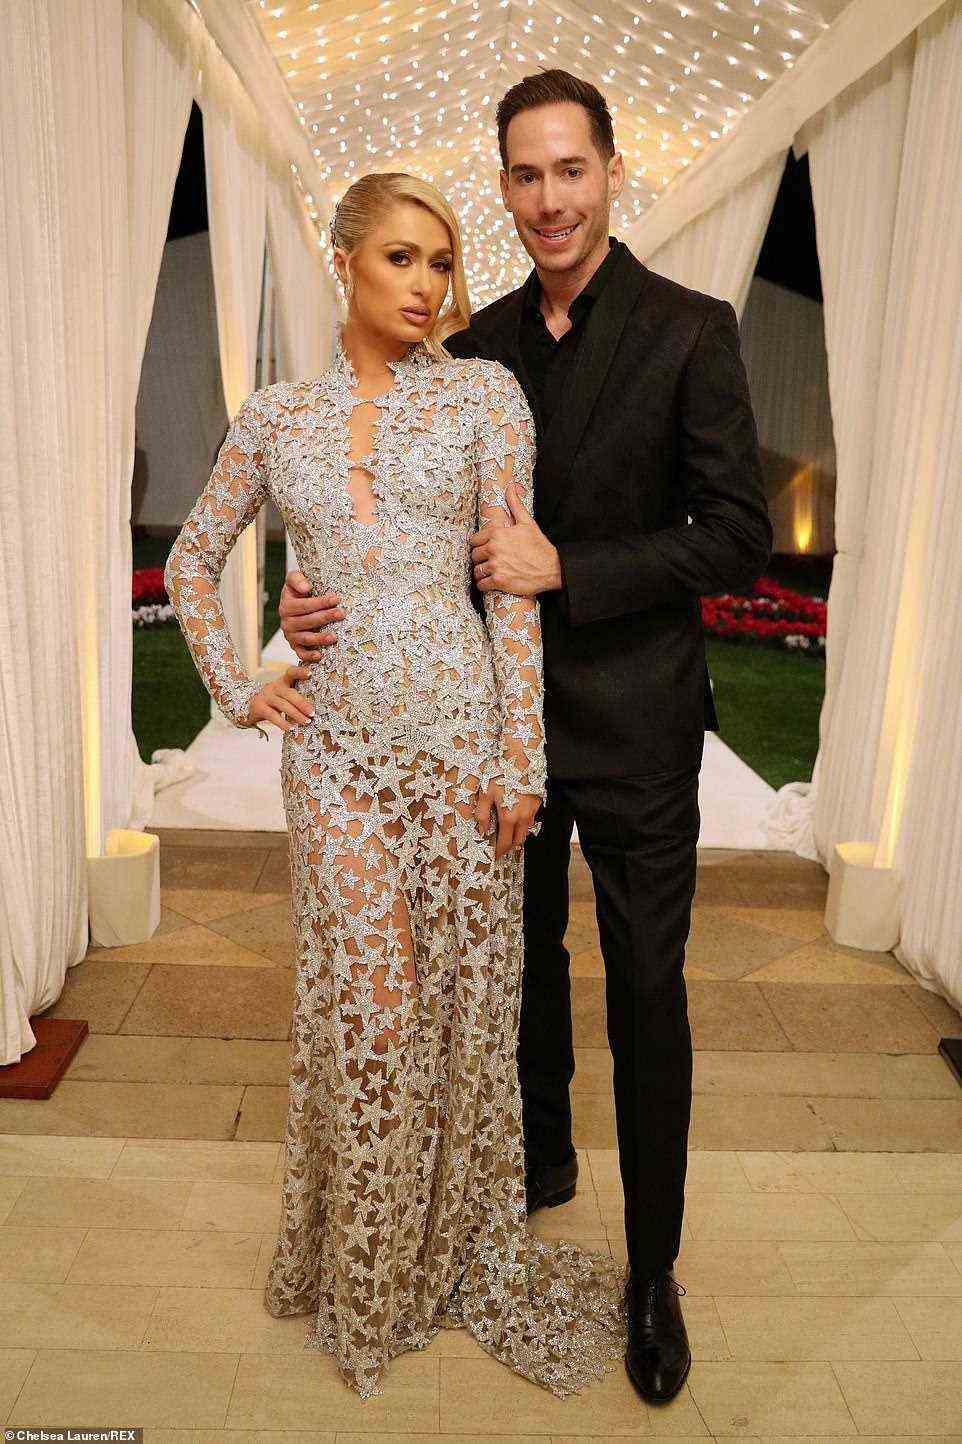 Newlyweds: Paris Hilton and Carter Reum brought the curtain down on their glittering three-day wedding celebrations with a black tie dinner on Saturday night